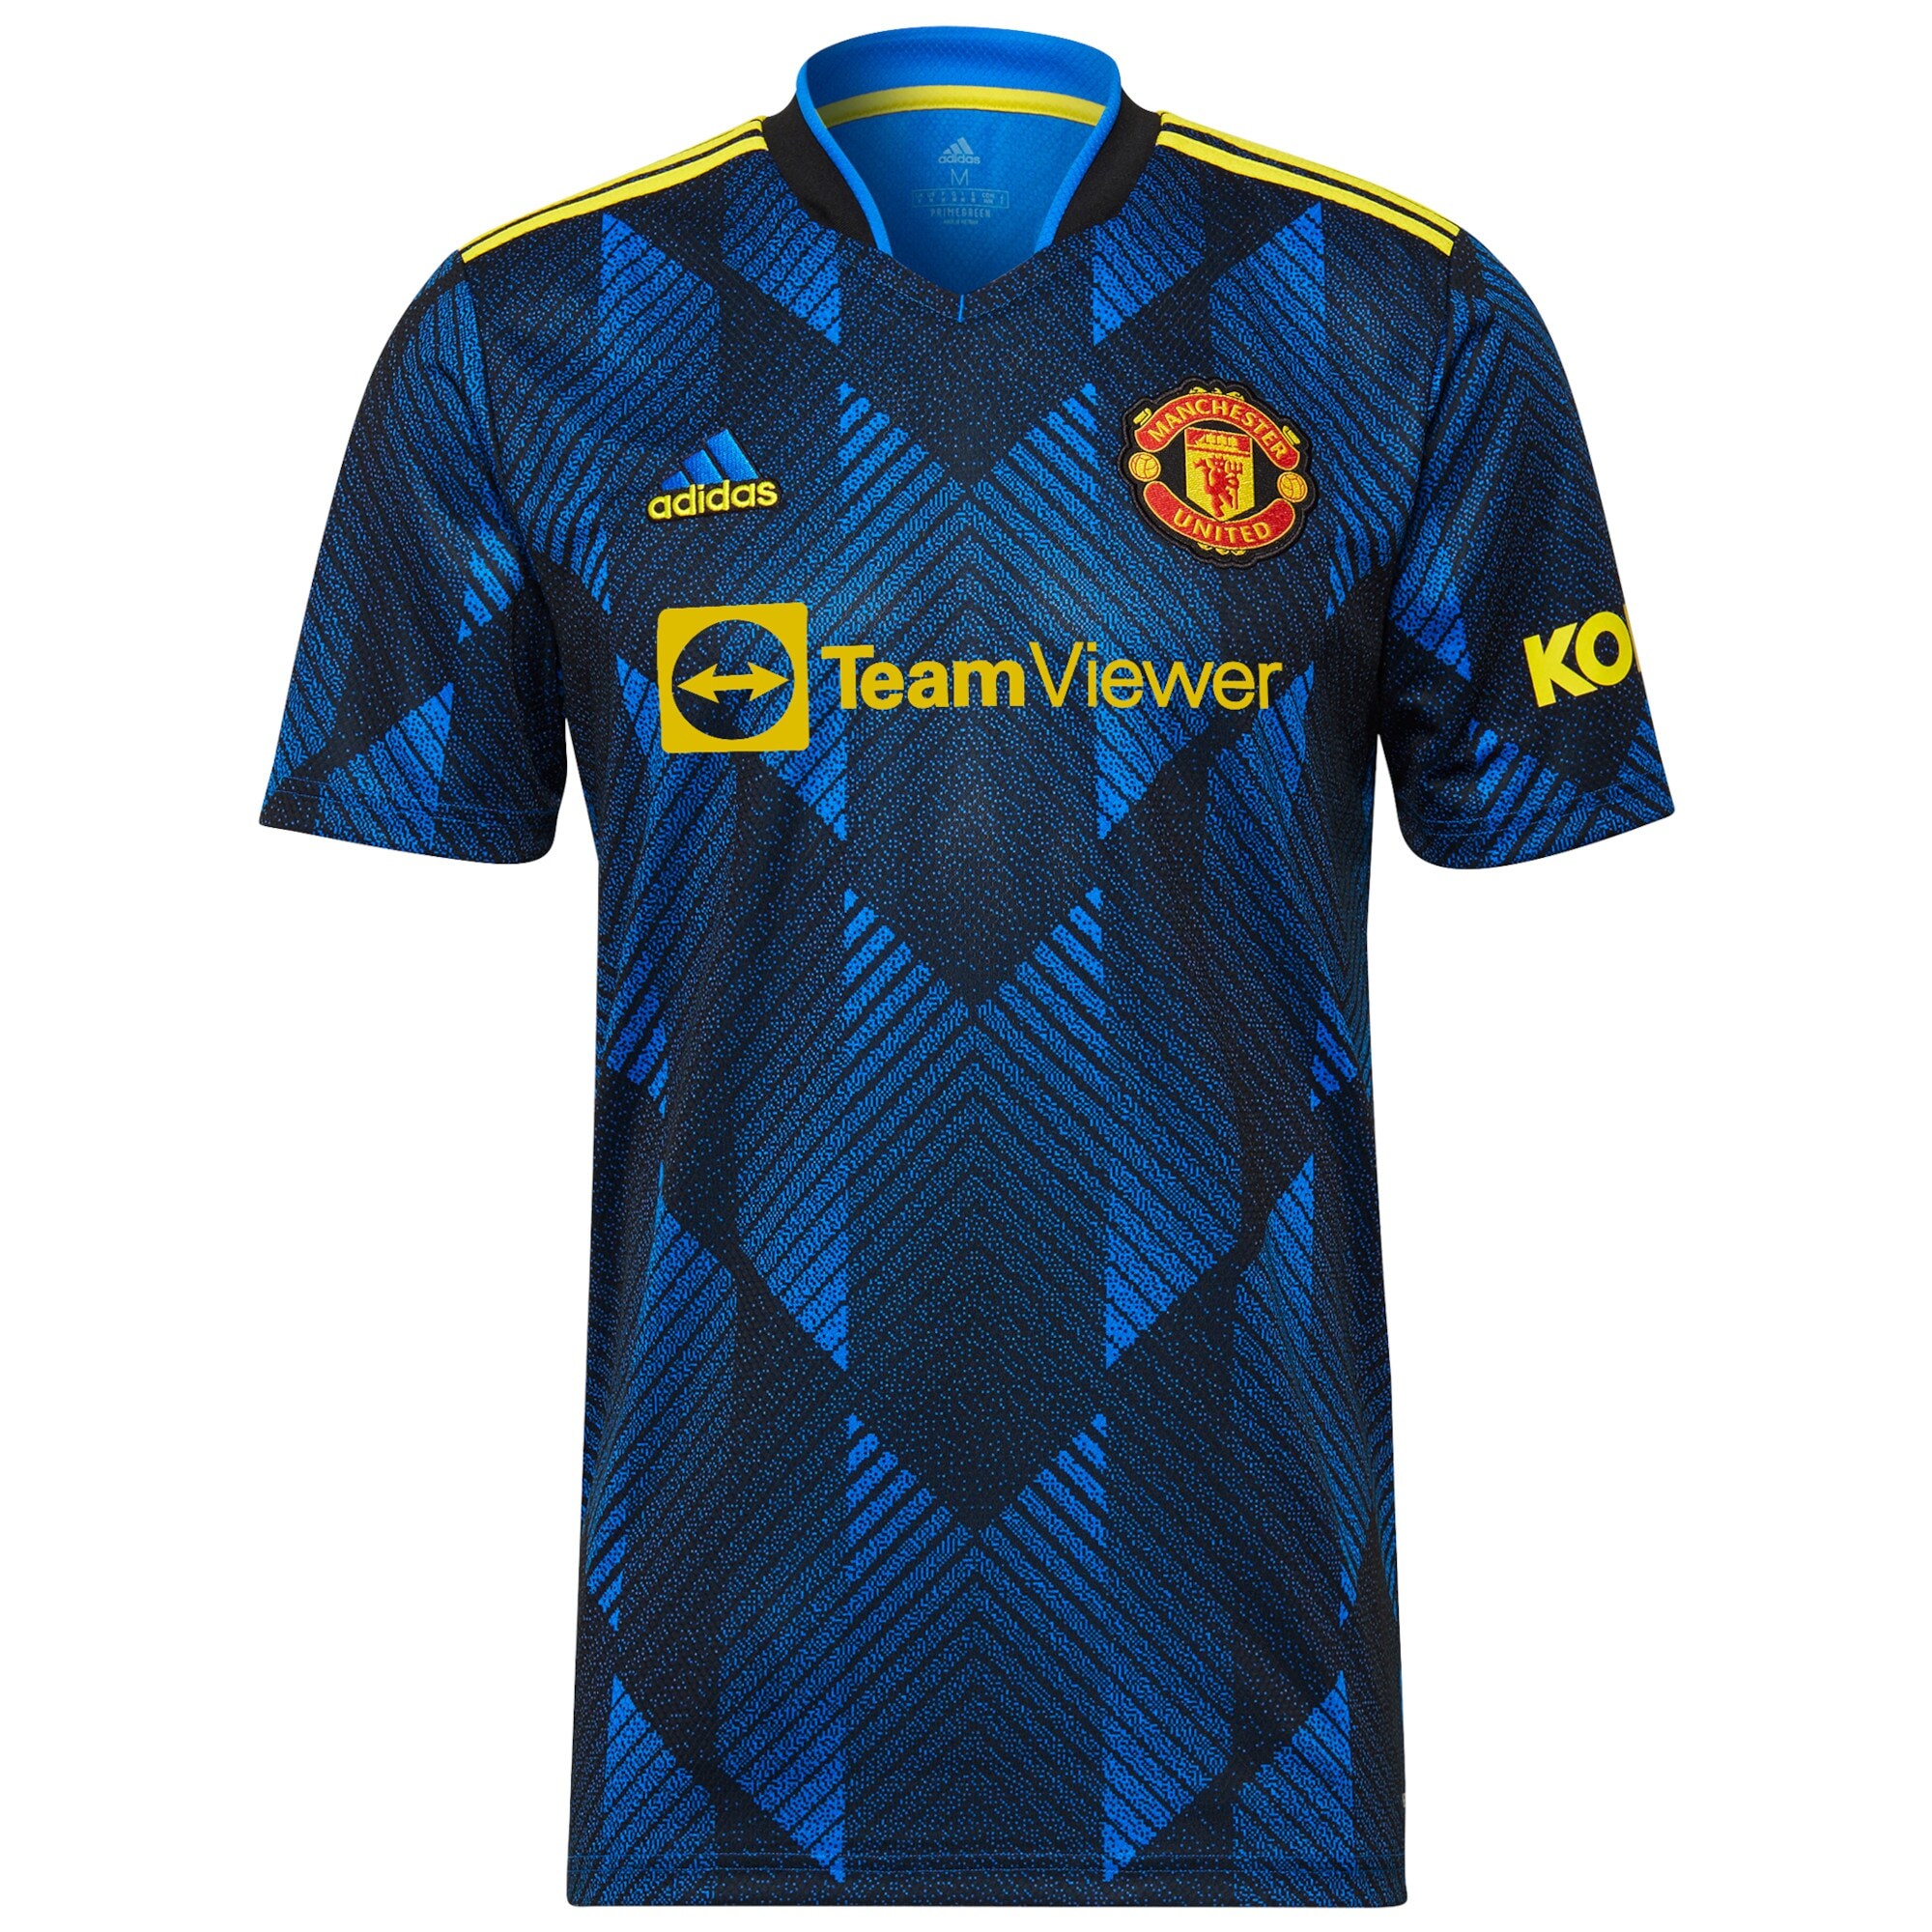 Manchester United Cup Third Shirt 2021-22 with Dalot 20 printing